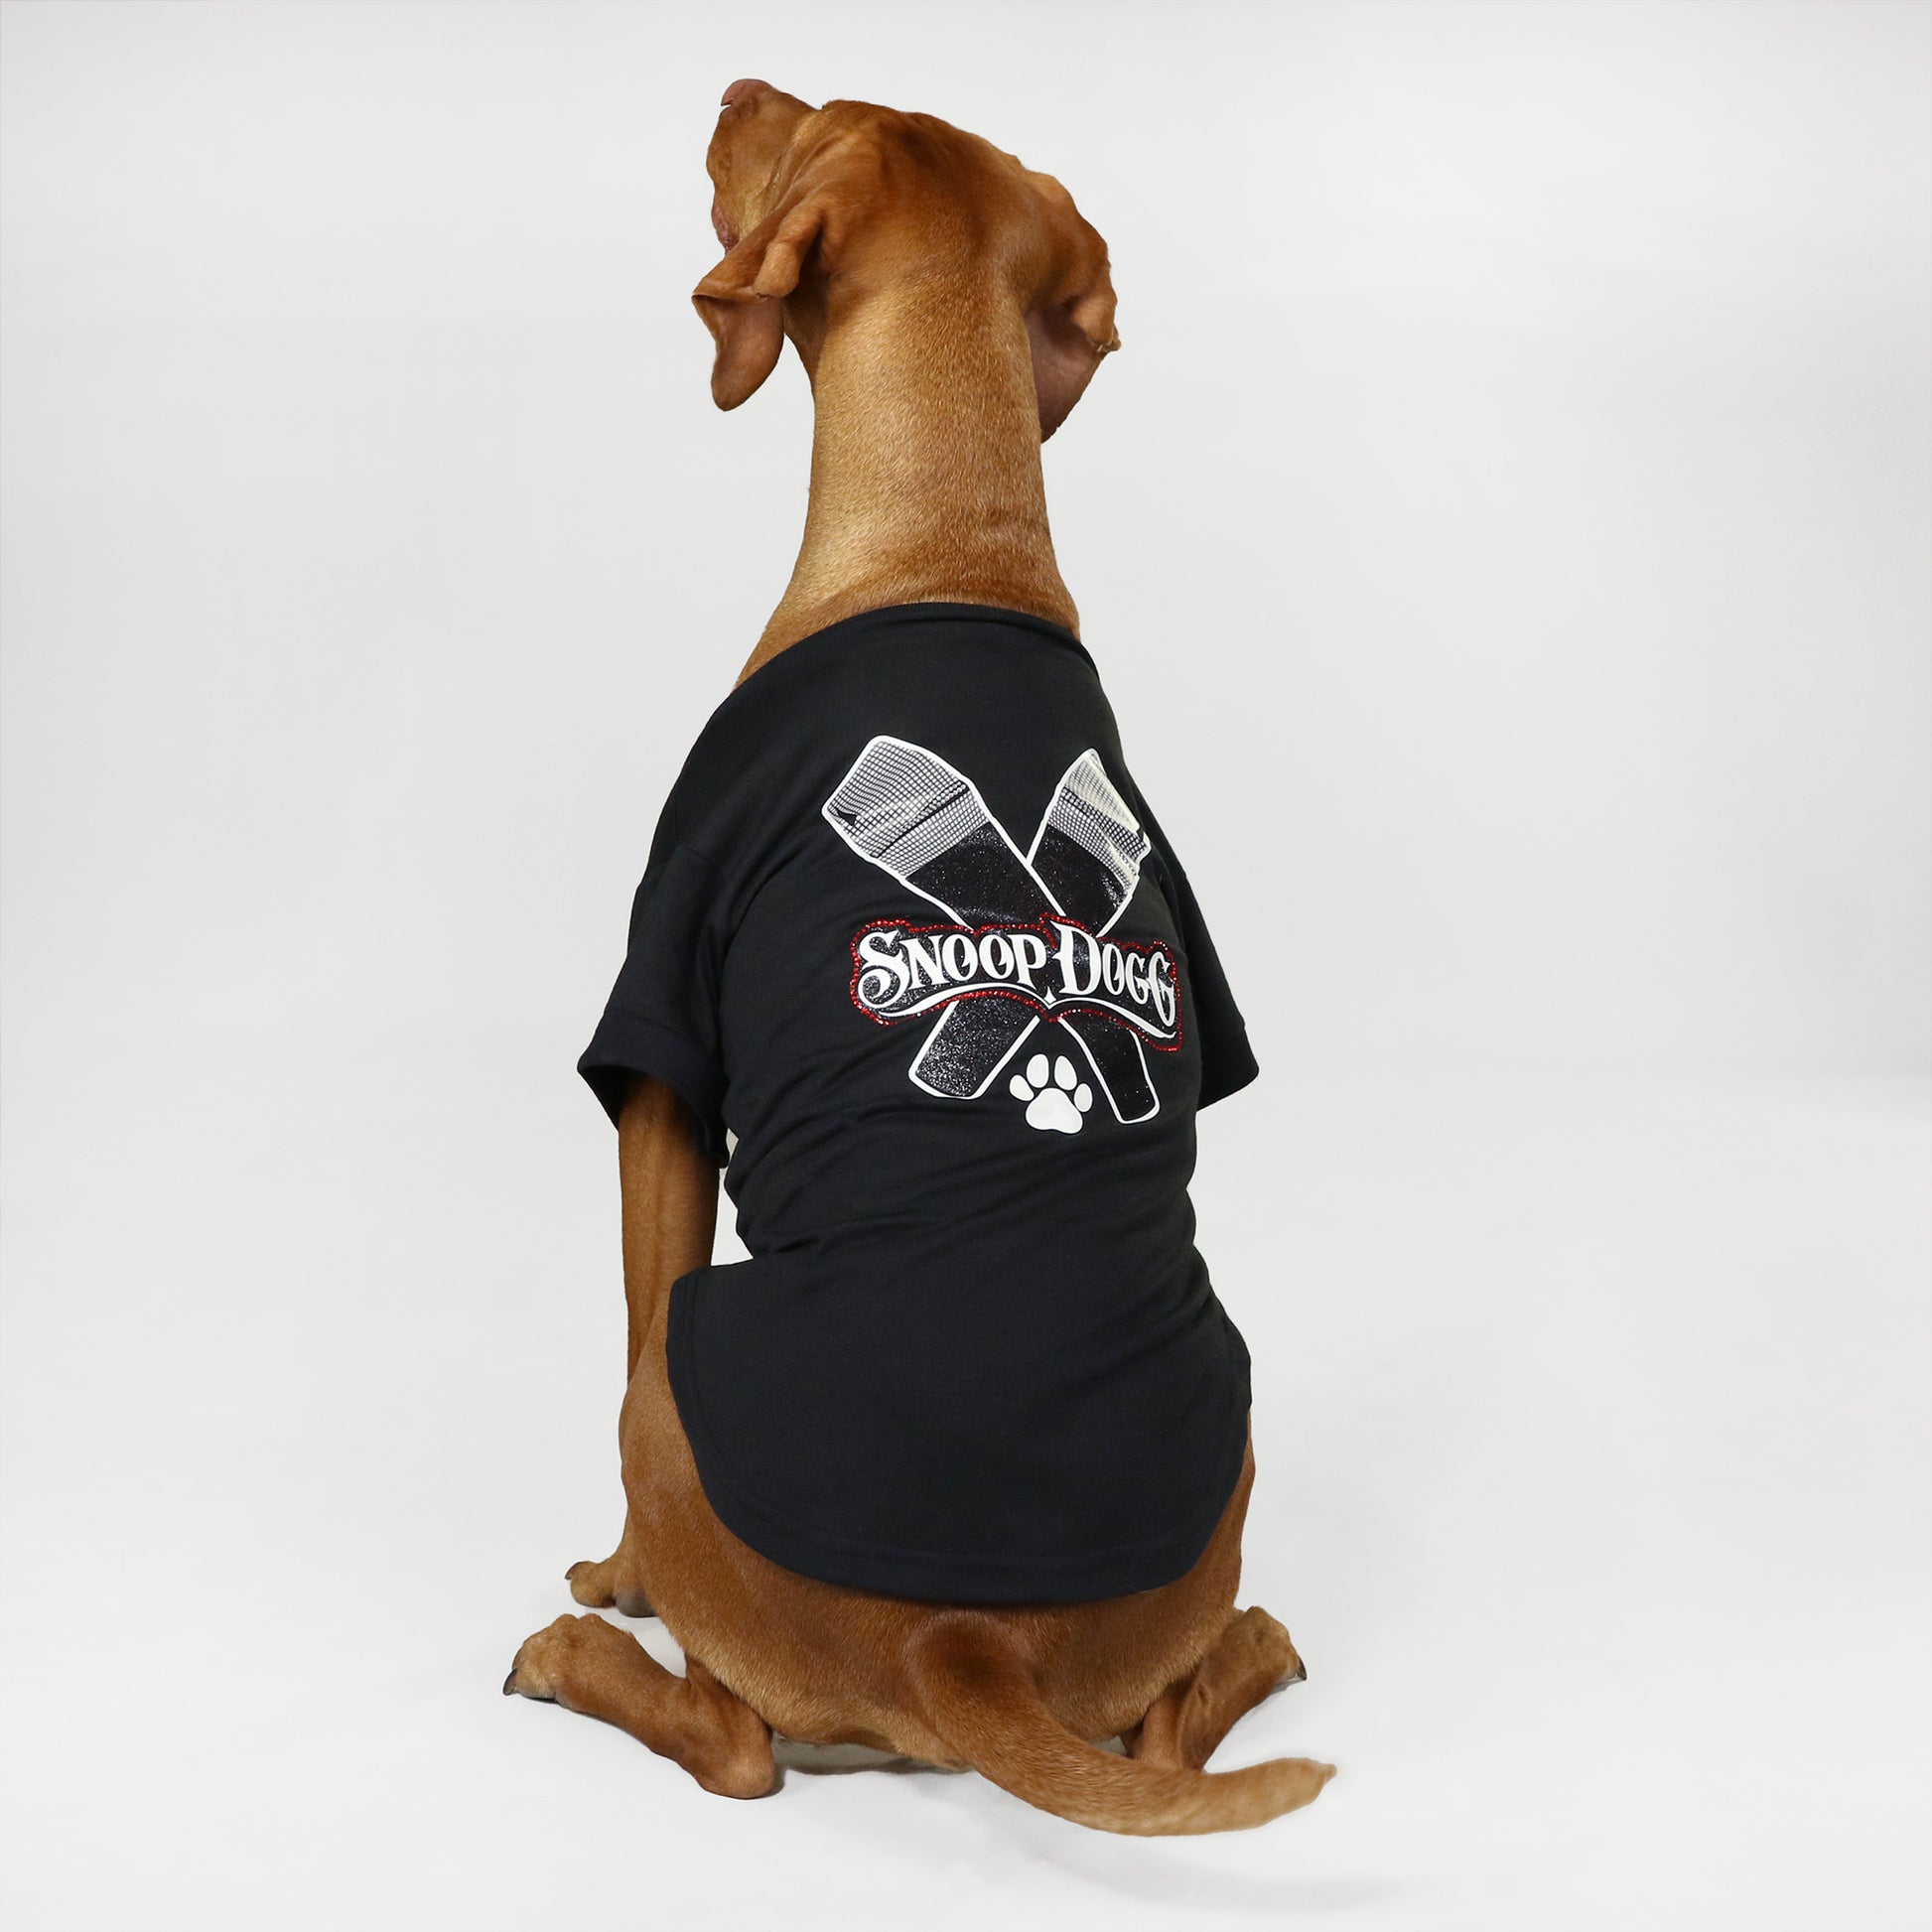 Rosie the Vizsla wearing the Mic Drop Deluxe Pet T-shirt in size X-Large.